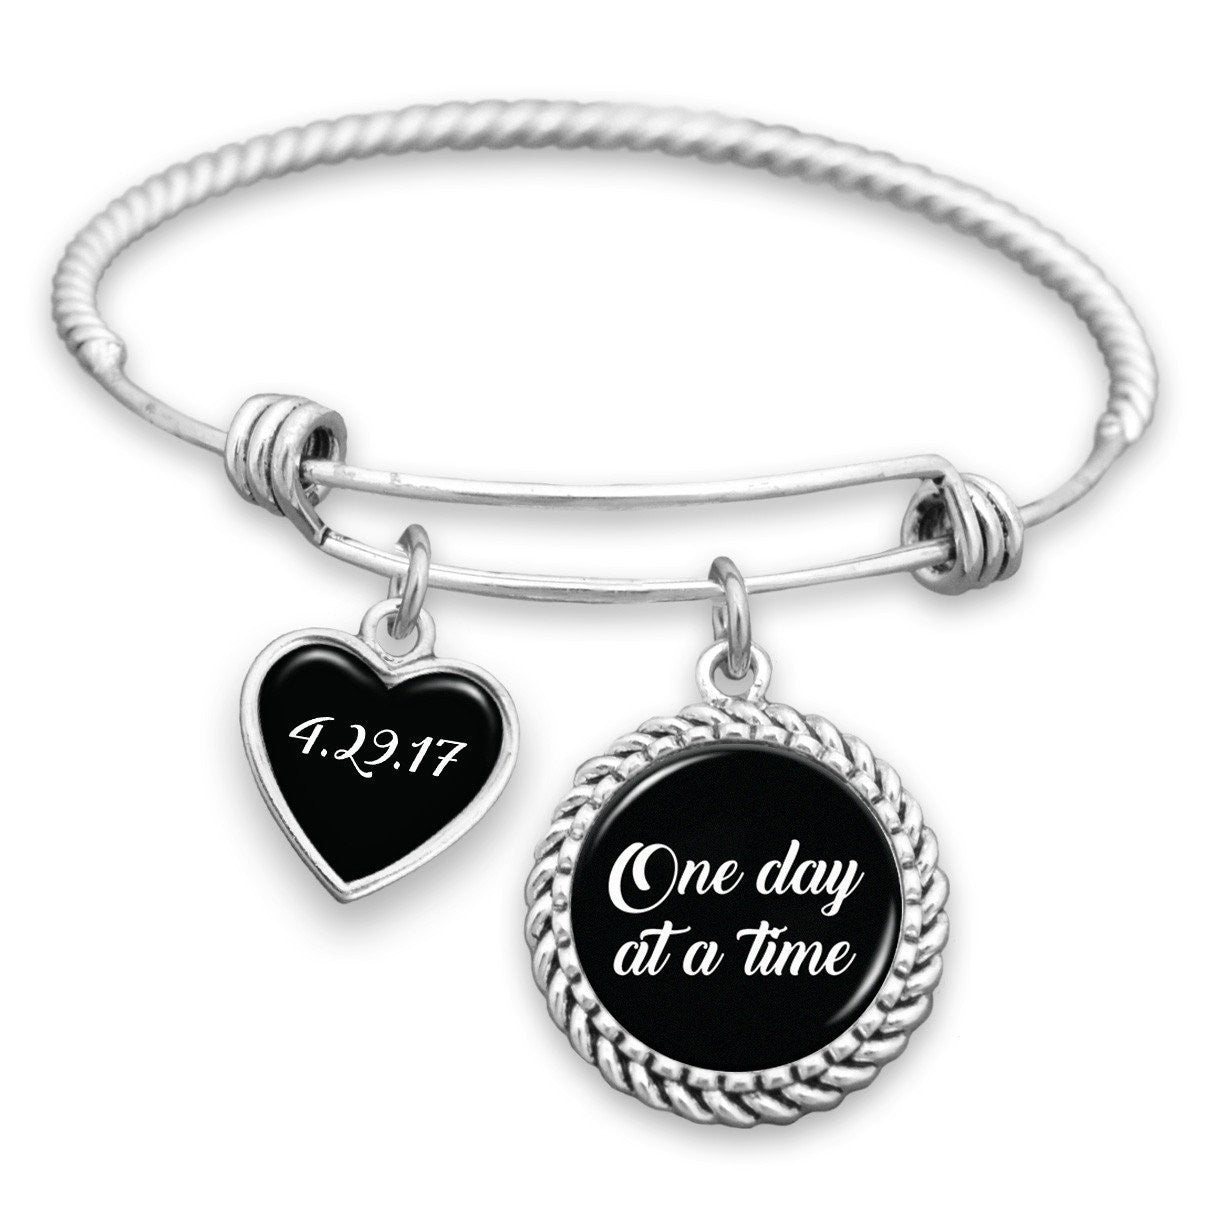 One Day At A Time Personalized Sobriety Date Charm Bracelet